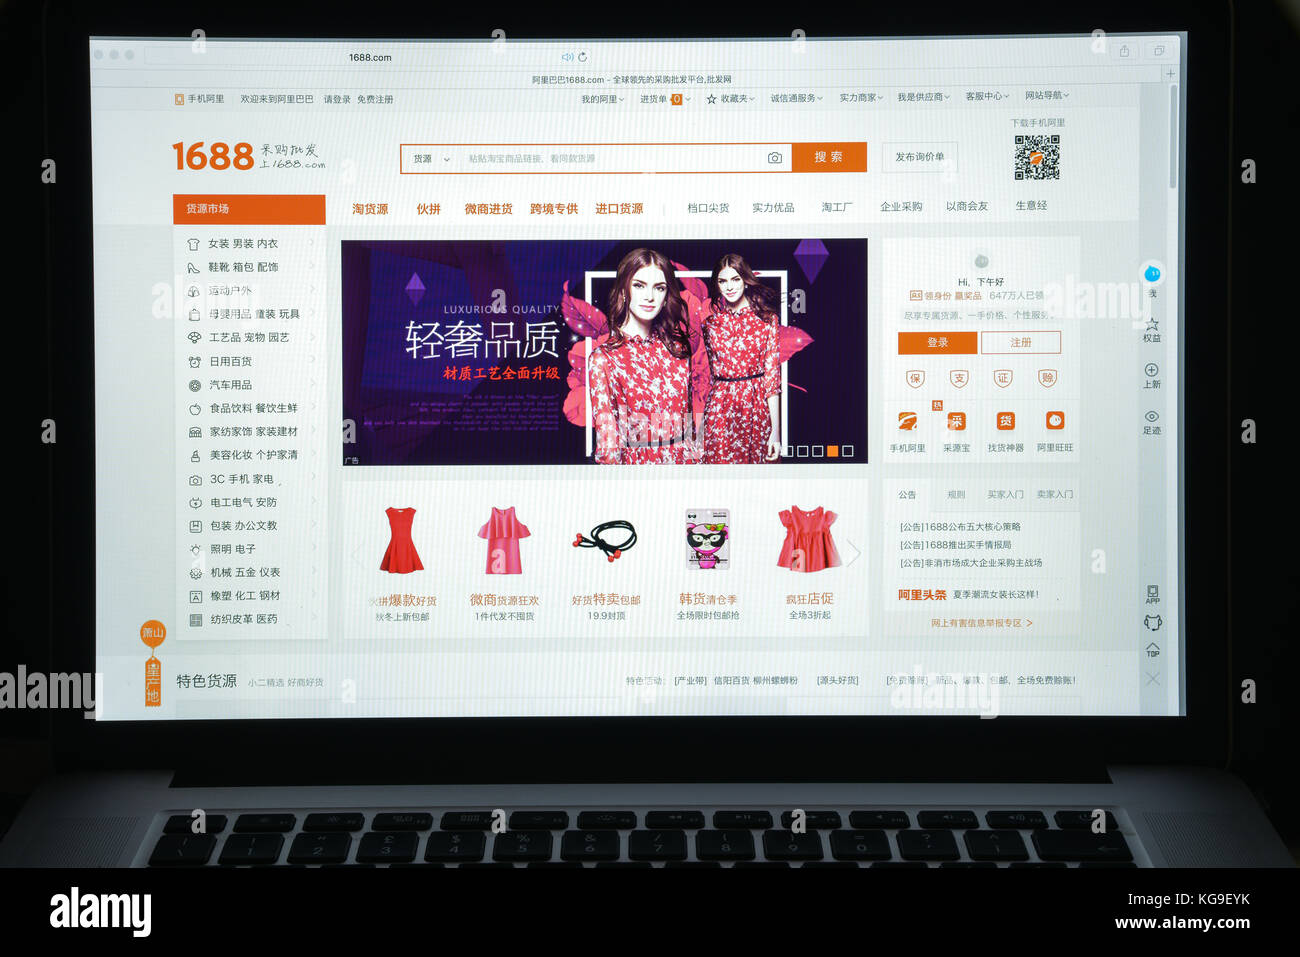 Milan, Italy - August 10, 2017: 1688 website homepage. 1688.com is also called Alibaba.cn, it's the Chinese Alibaba wholesale site 1688 logo visible. Stock Photo